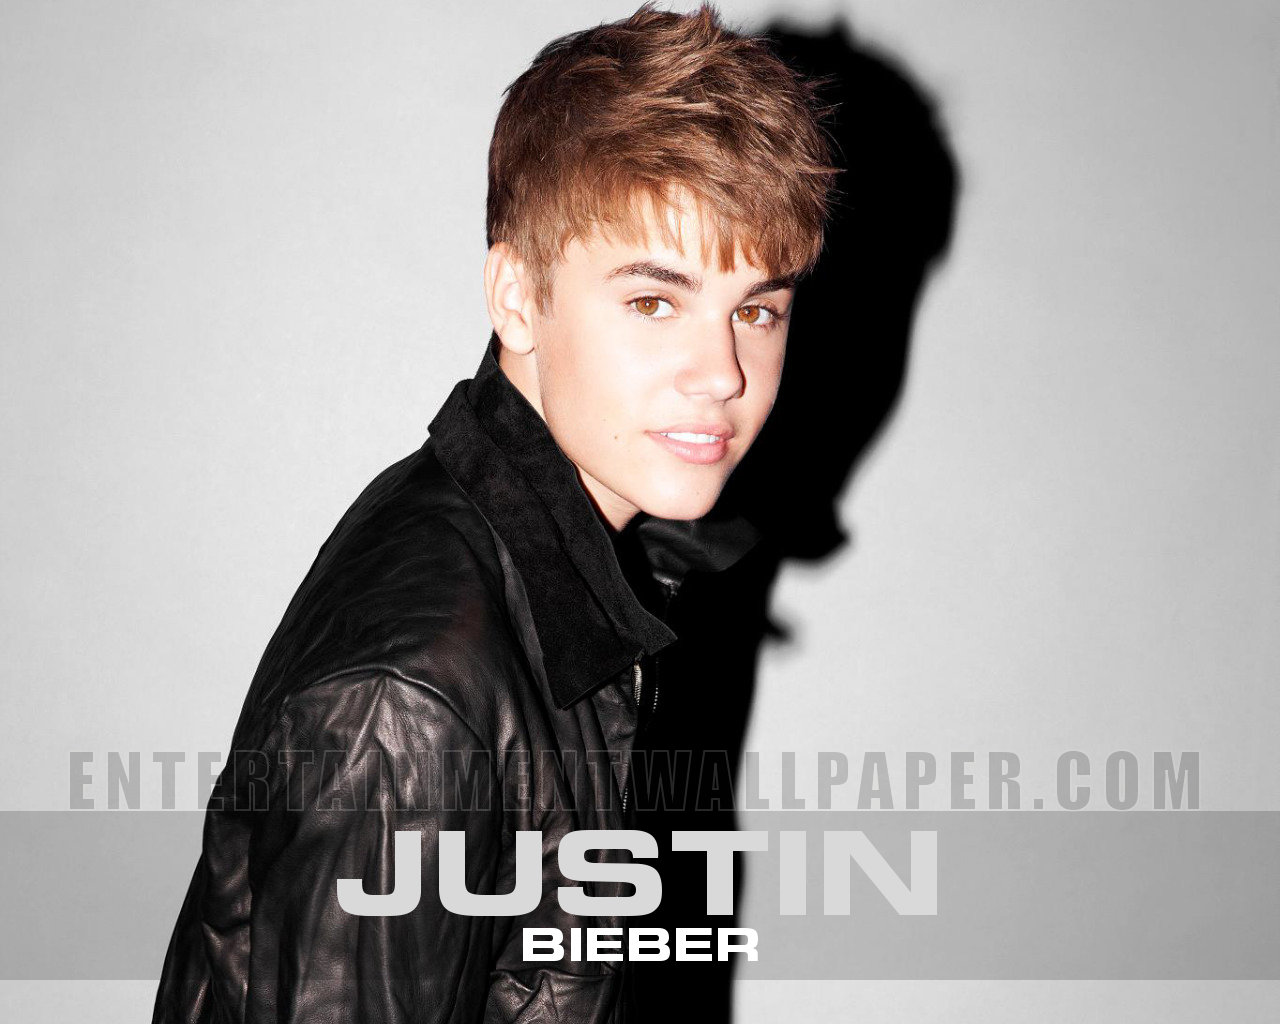 Collection Of Free Download Justin Bieber Images Wallpapers - Justin Bieber  Under The Mistletoe - 1280x1024 Wallpaper 